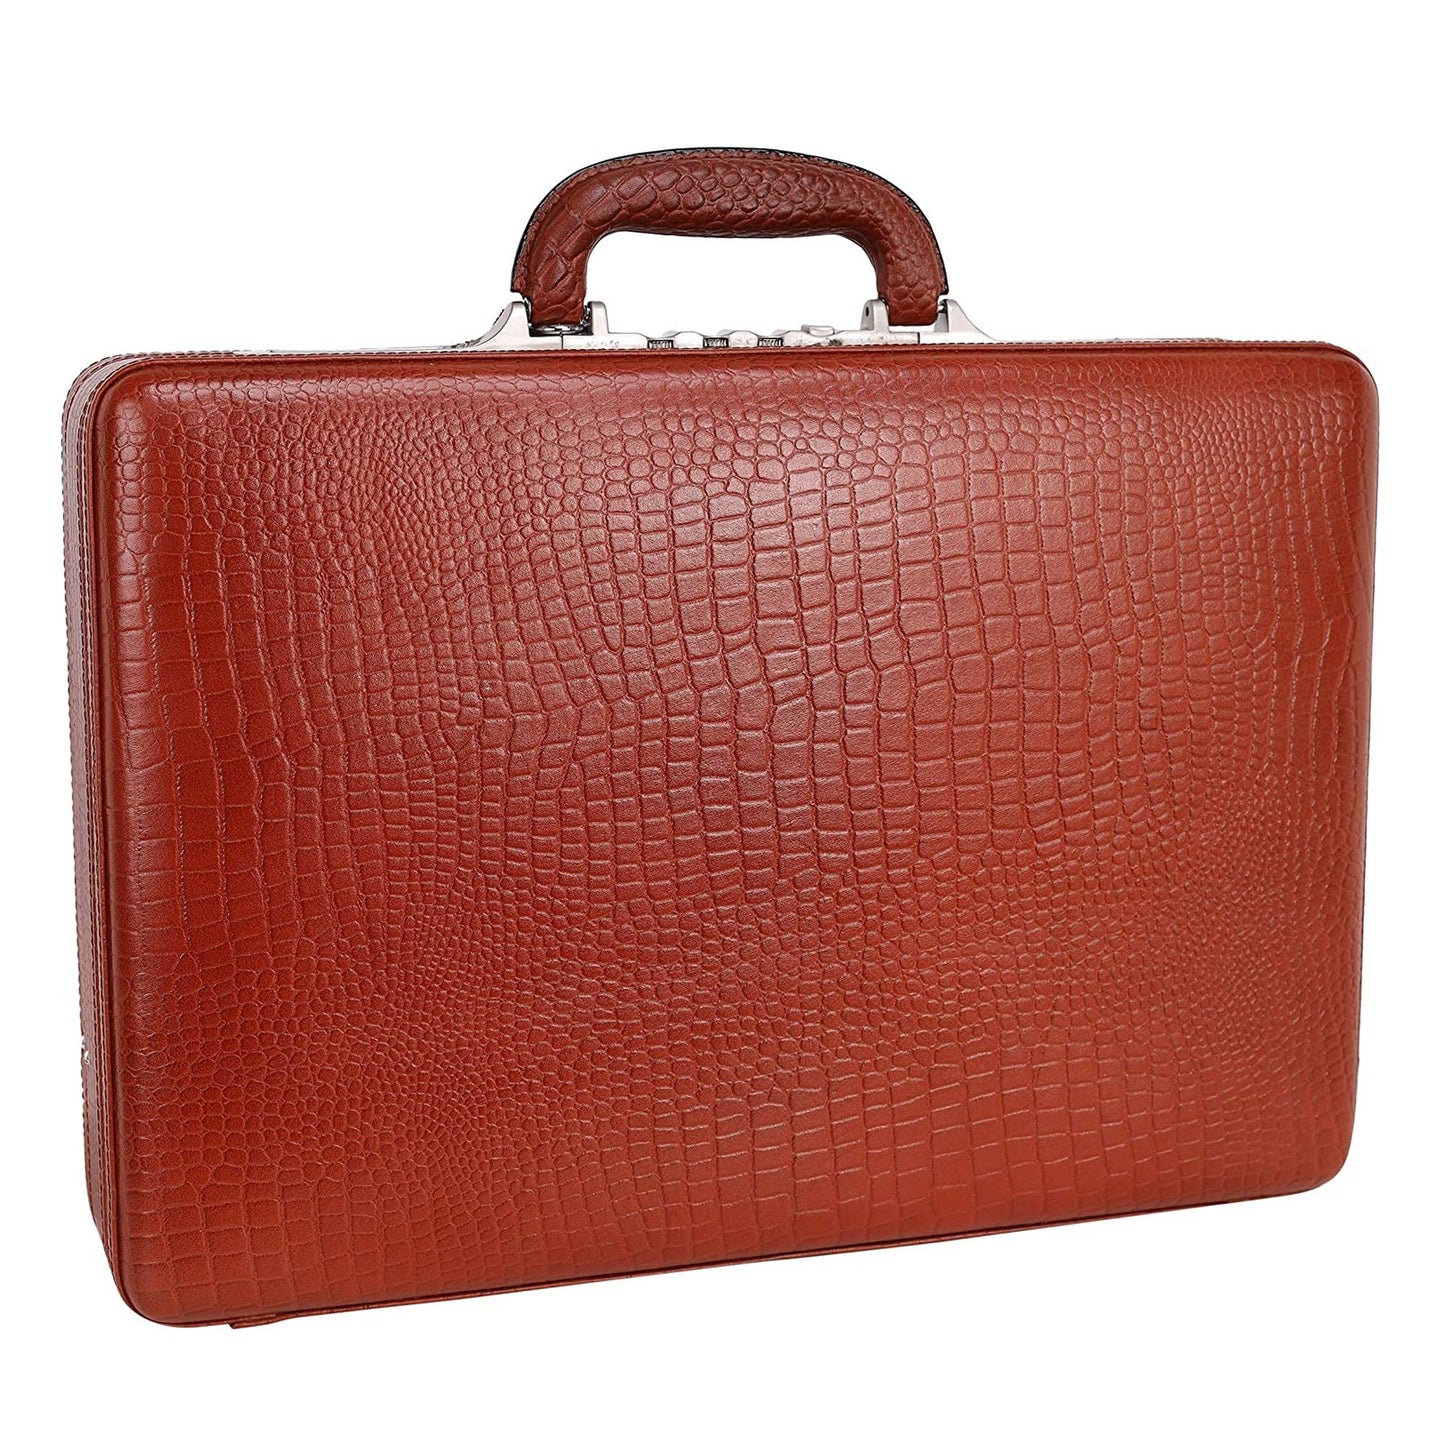 Premium Quality Leather Briefcase For Mens Croco Embossed Genuine Leather Attache Briefcase Laptop Case Expandable Bag Business  Handbag